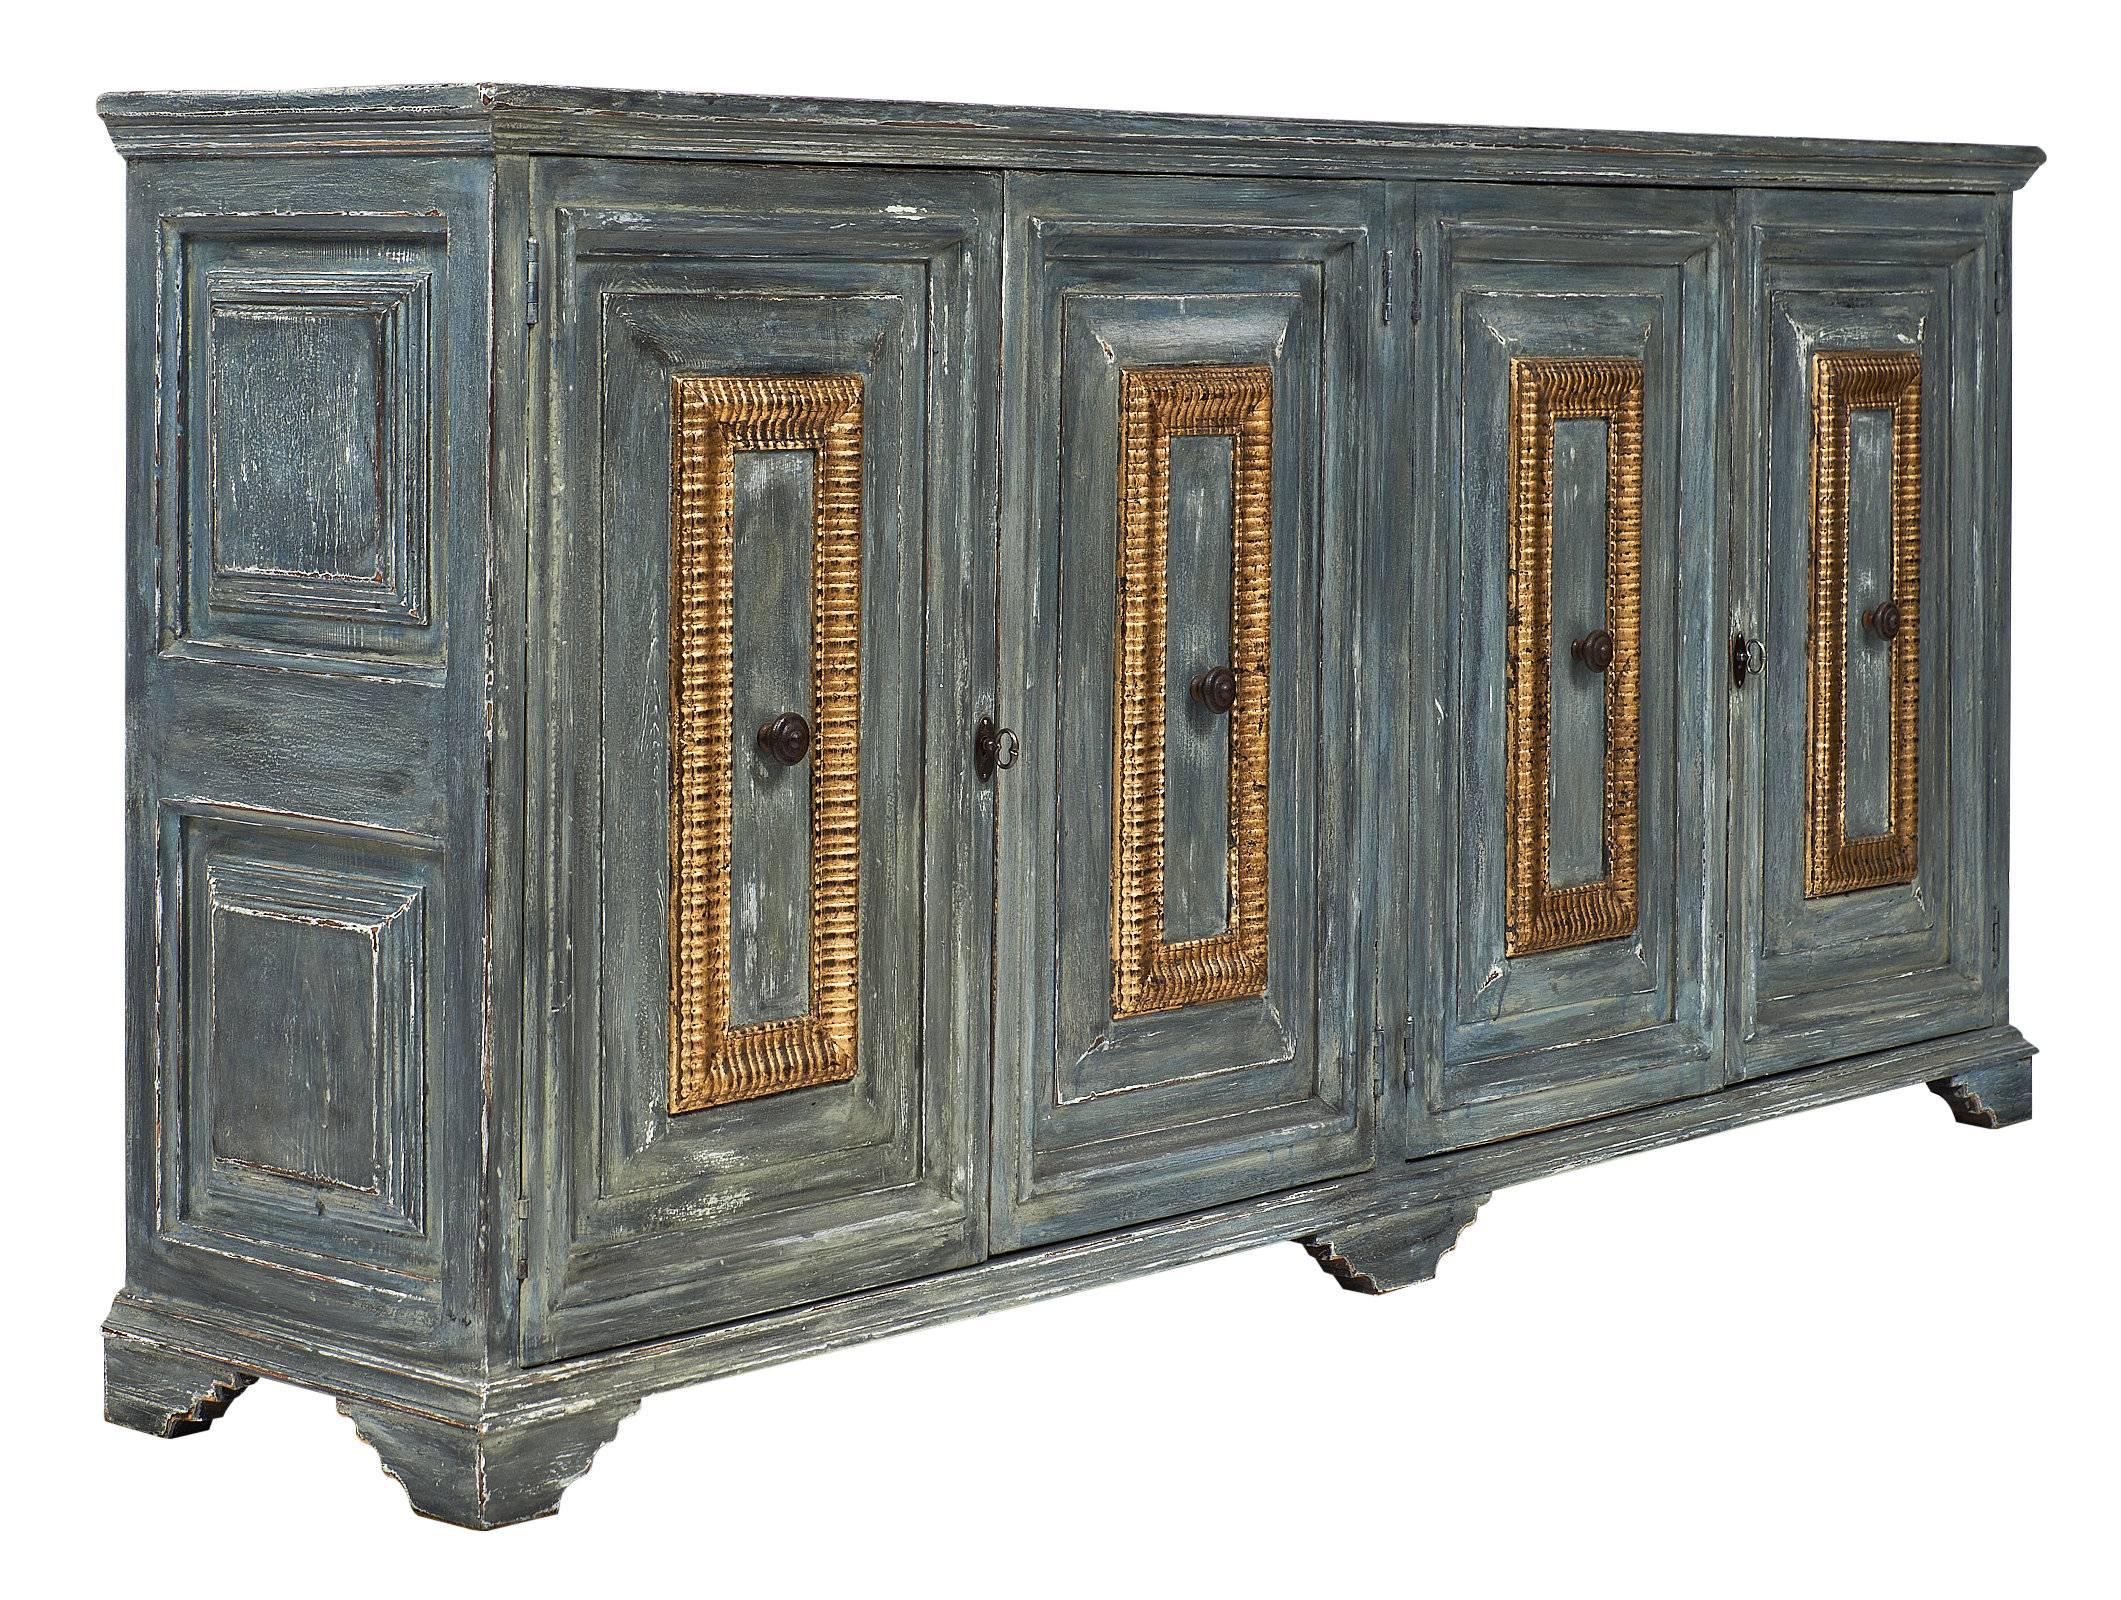 Louis XIII style French buffet of painted and gold leafed fir. There are four doors with forged iron handles and original locks and keys in working condition.